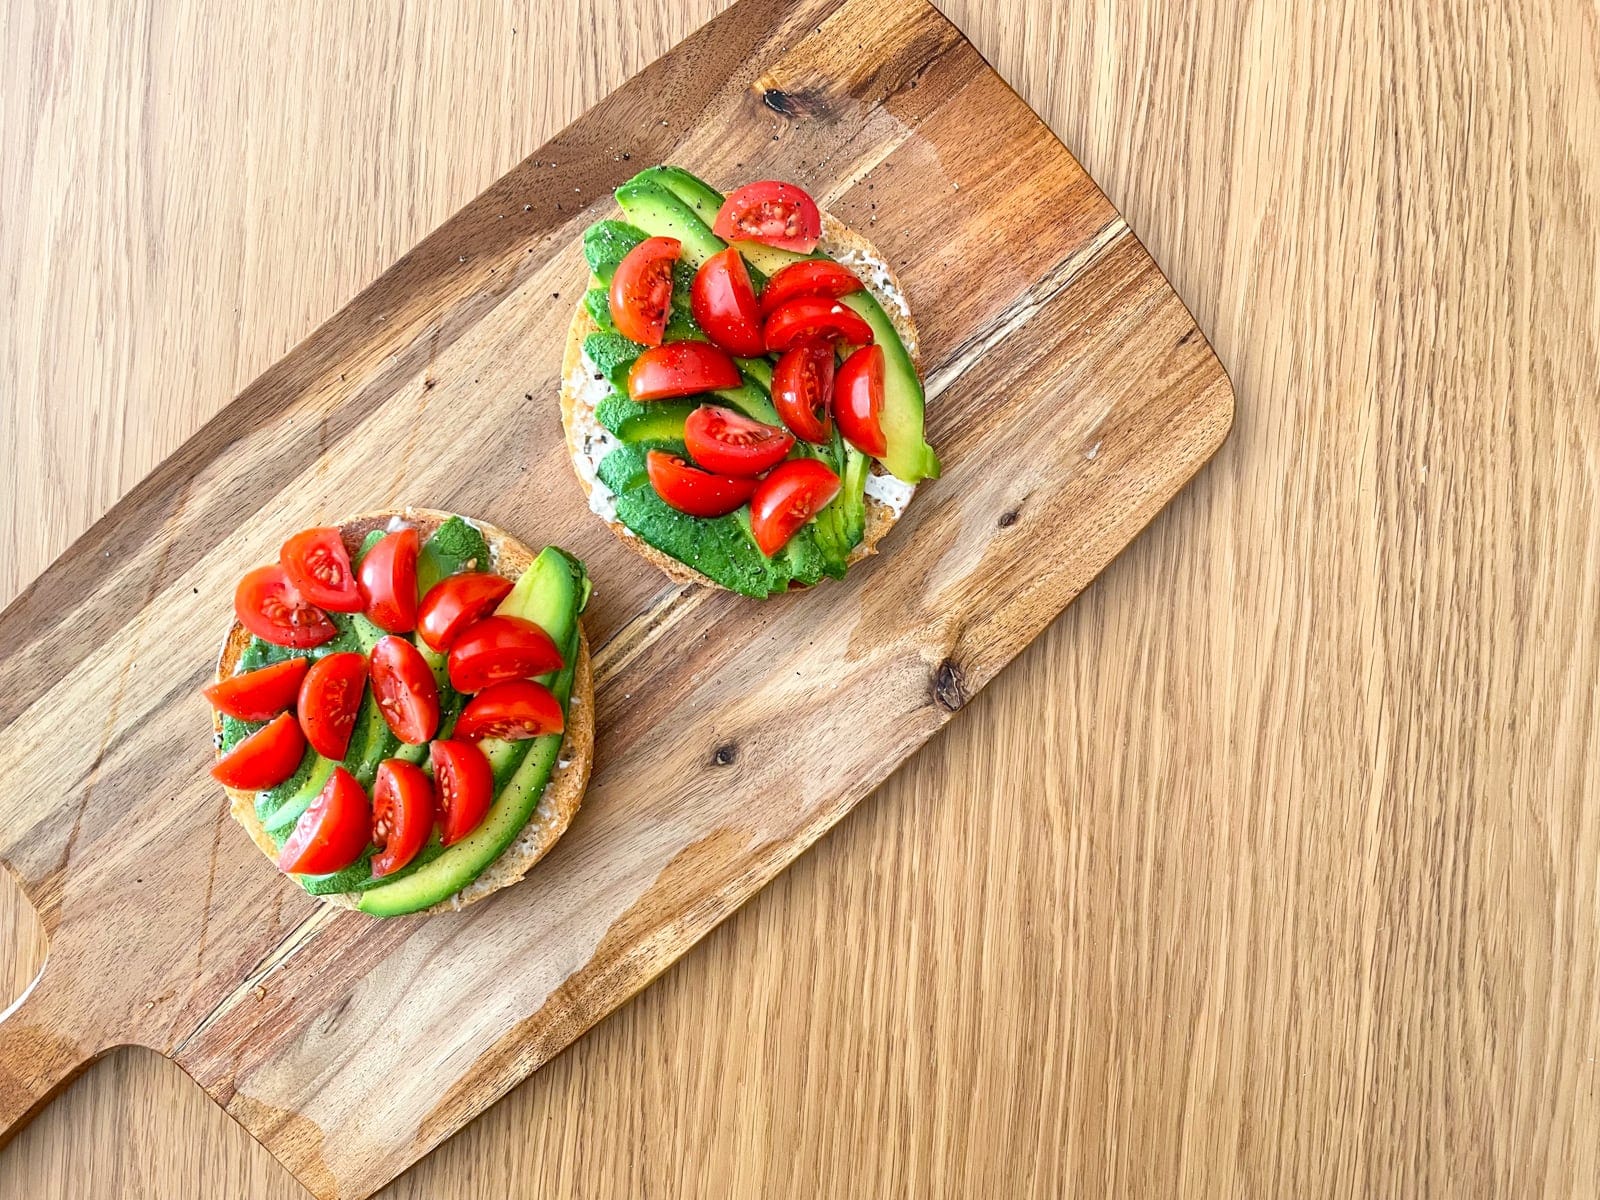 A wooden board on a wooden table, served with sliced avocado and wedges of sliced tomato